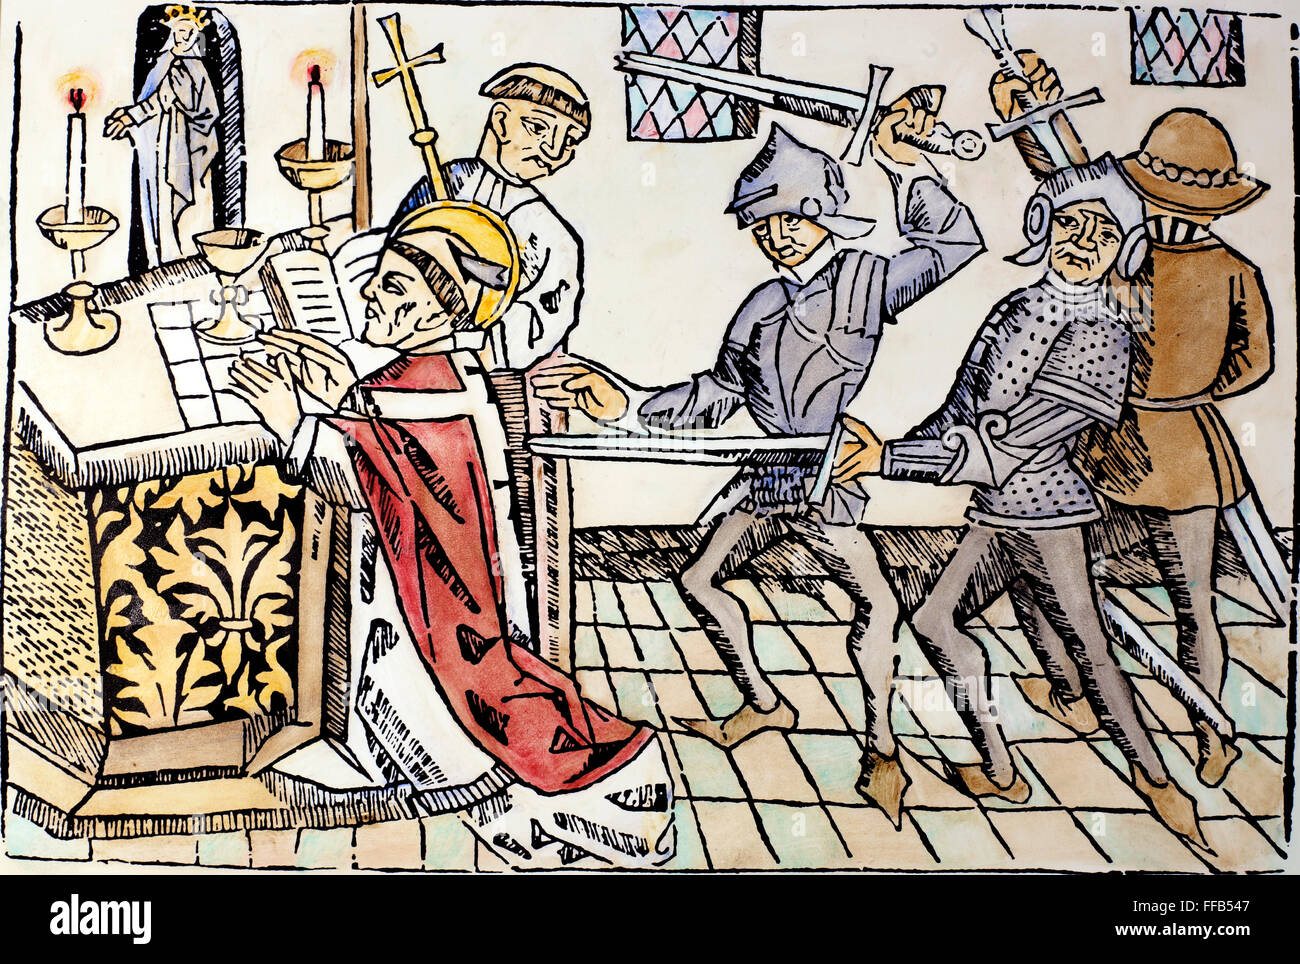 THOMAS A BECKET MURDER. /nThe murder of St. Thomas α Becket at Canterbury Cathedral, 29 December 1170, by knights from the court of King Henry II. Woodcut from William Caxton's edition of the 'Golden Legend,' c1484-85. Stock Photo